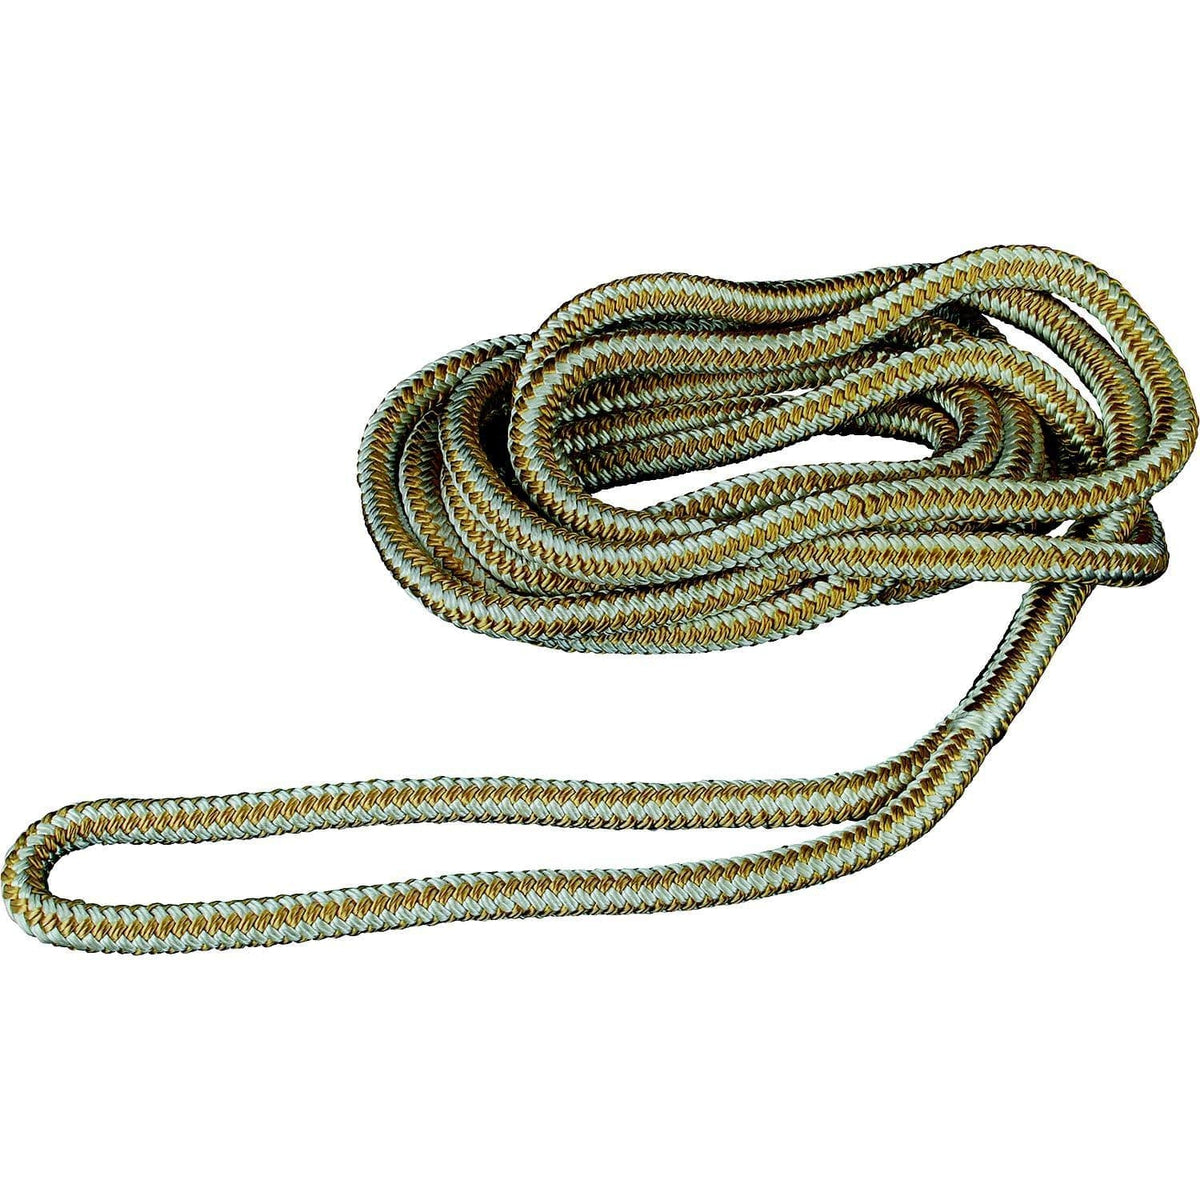 Attwood Marine Qualifies for Free Shipping Attwood 1/2" x 15’ Dockline Gold Double Braided Nylon #117565-7